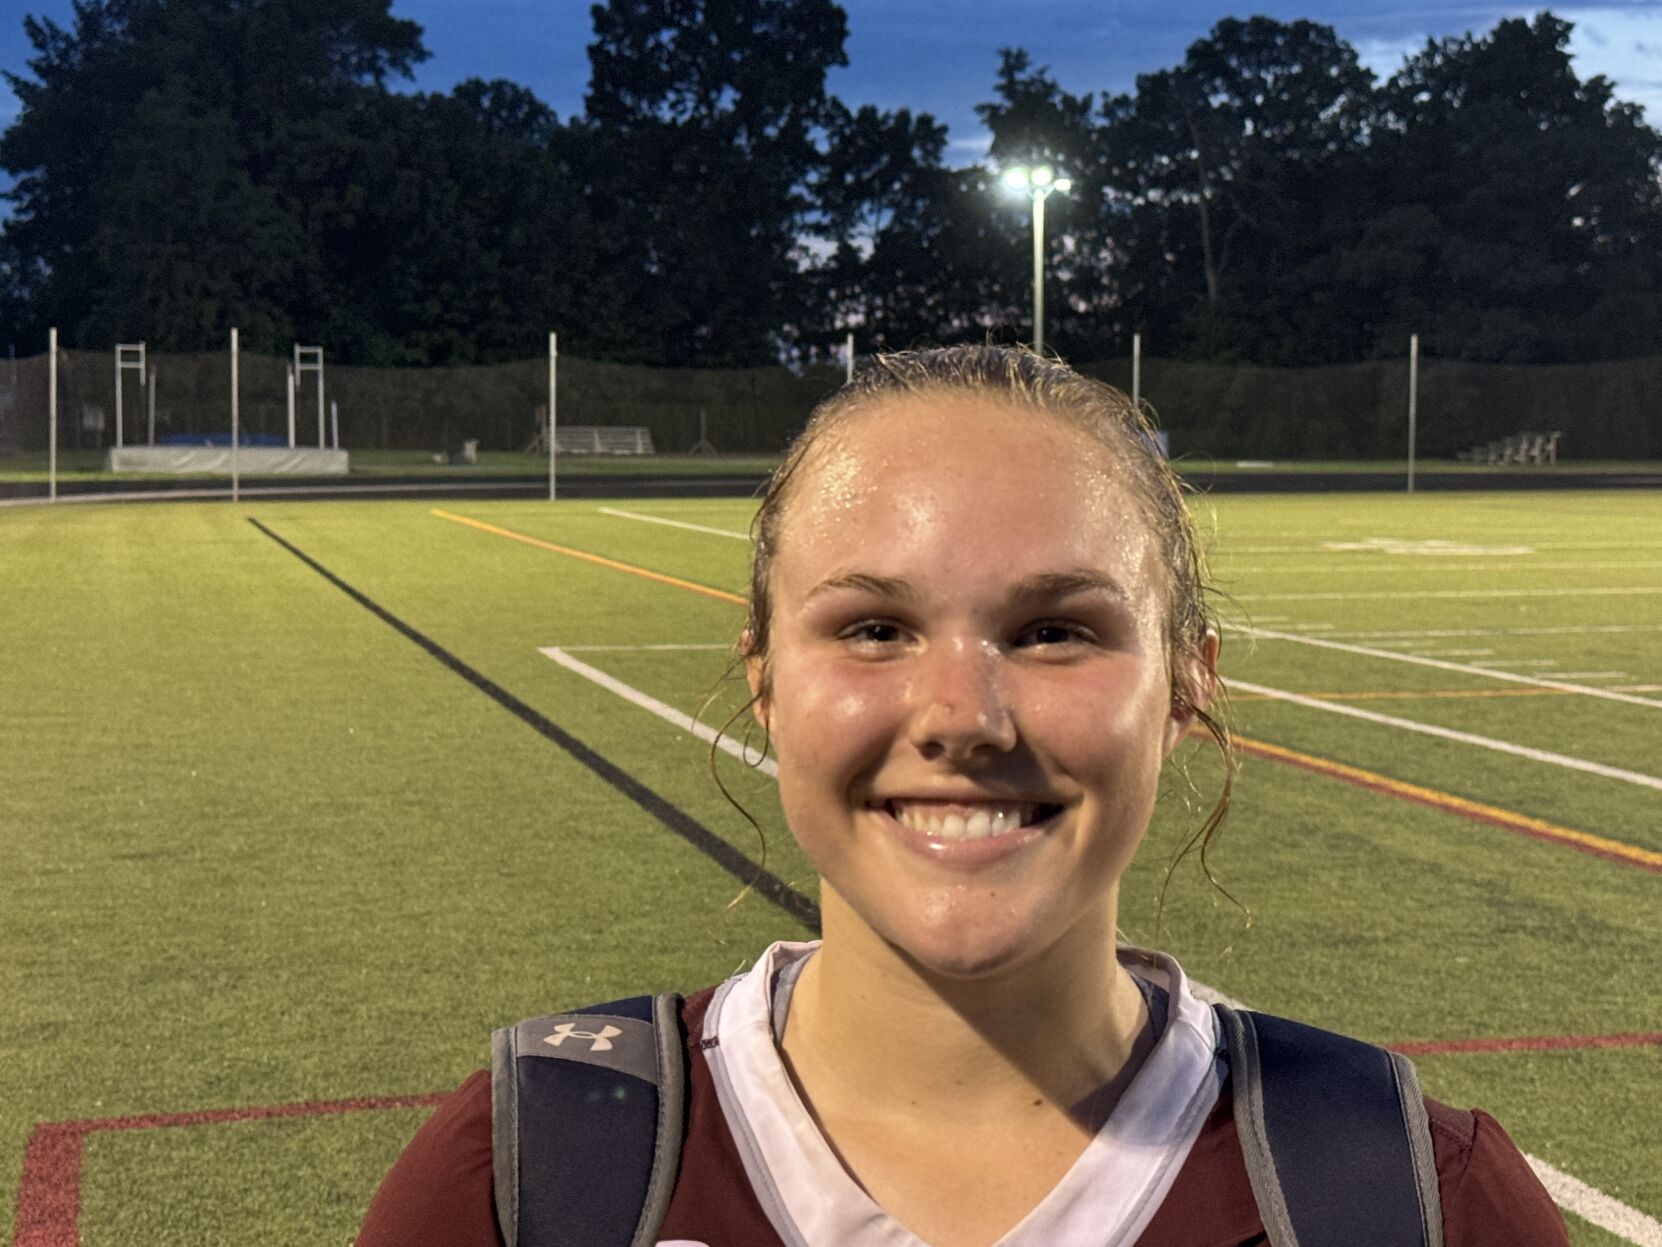 VES takes control late to down E.C. Glass in girls lacrosse